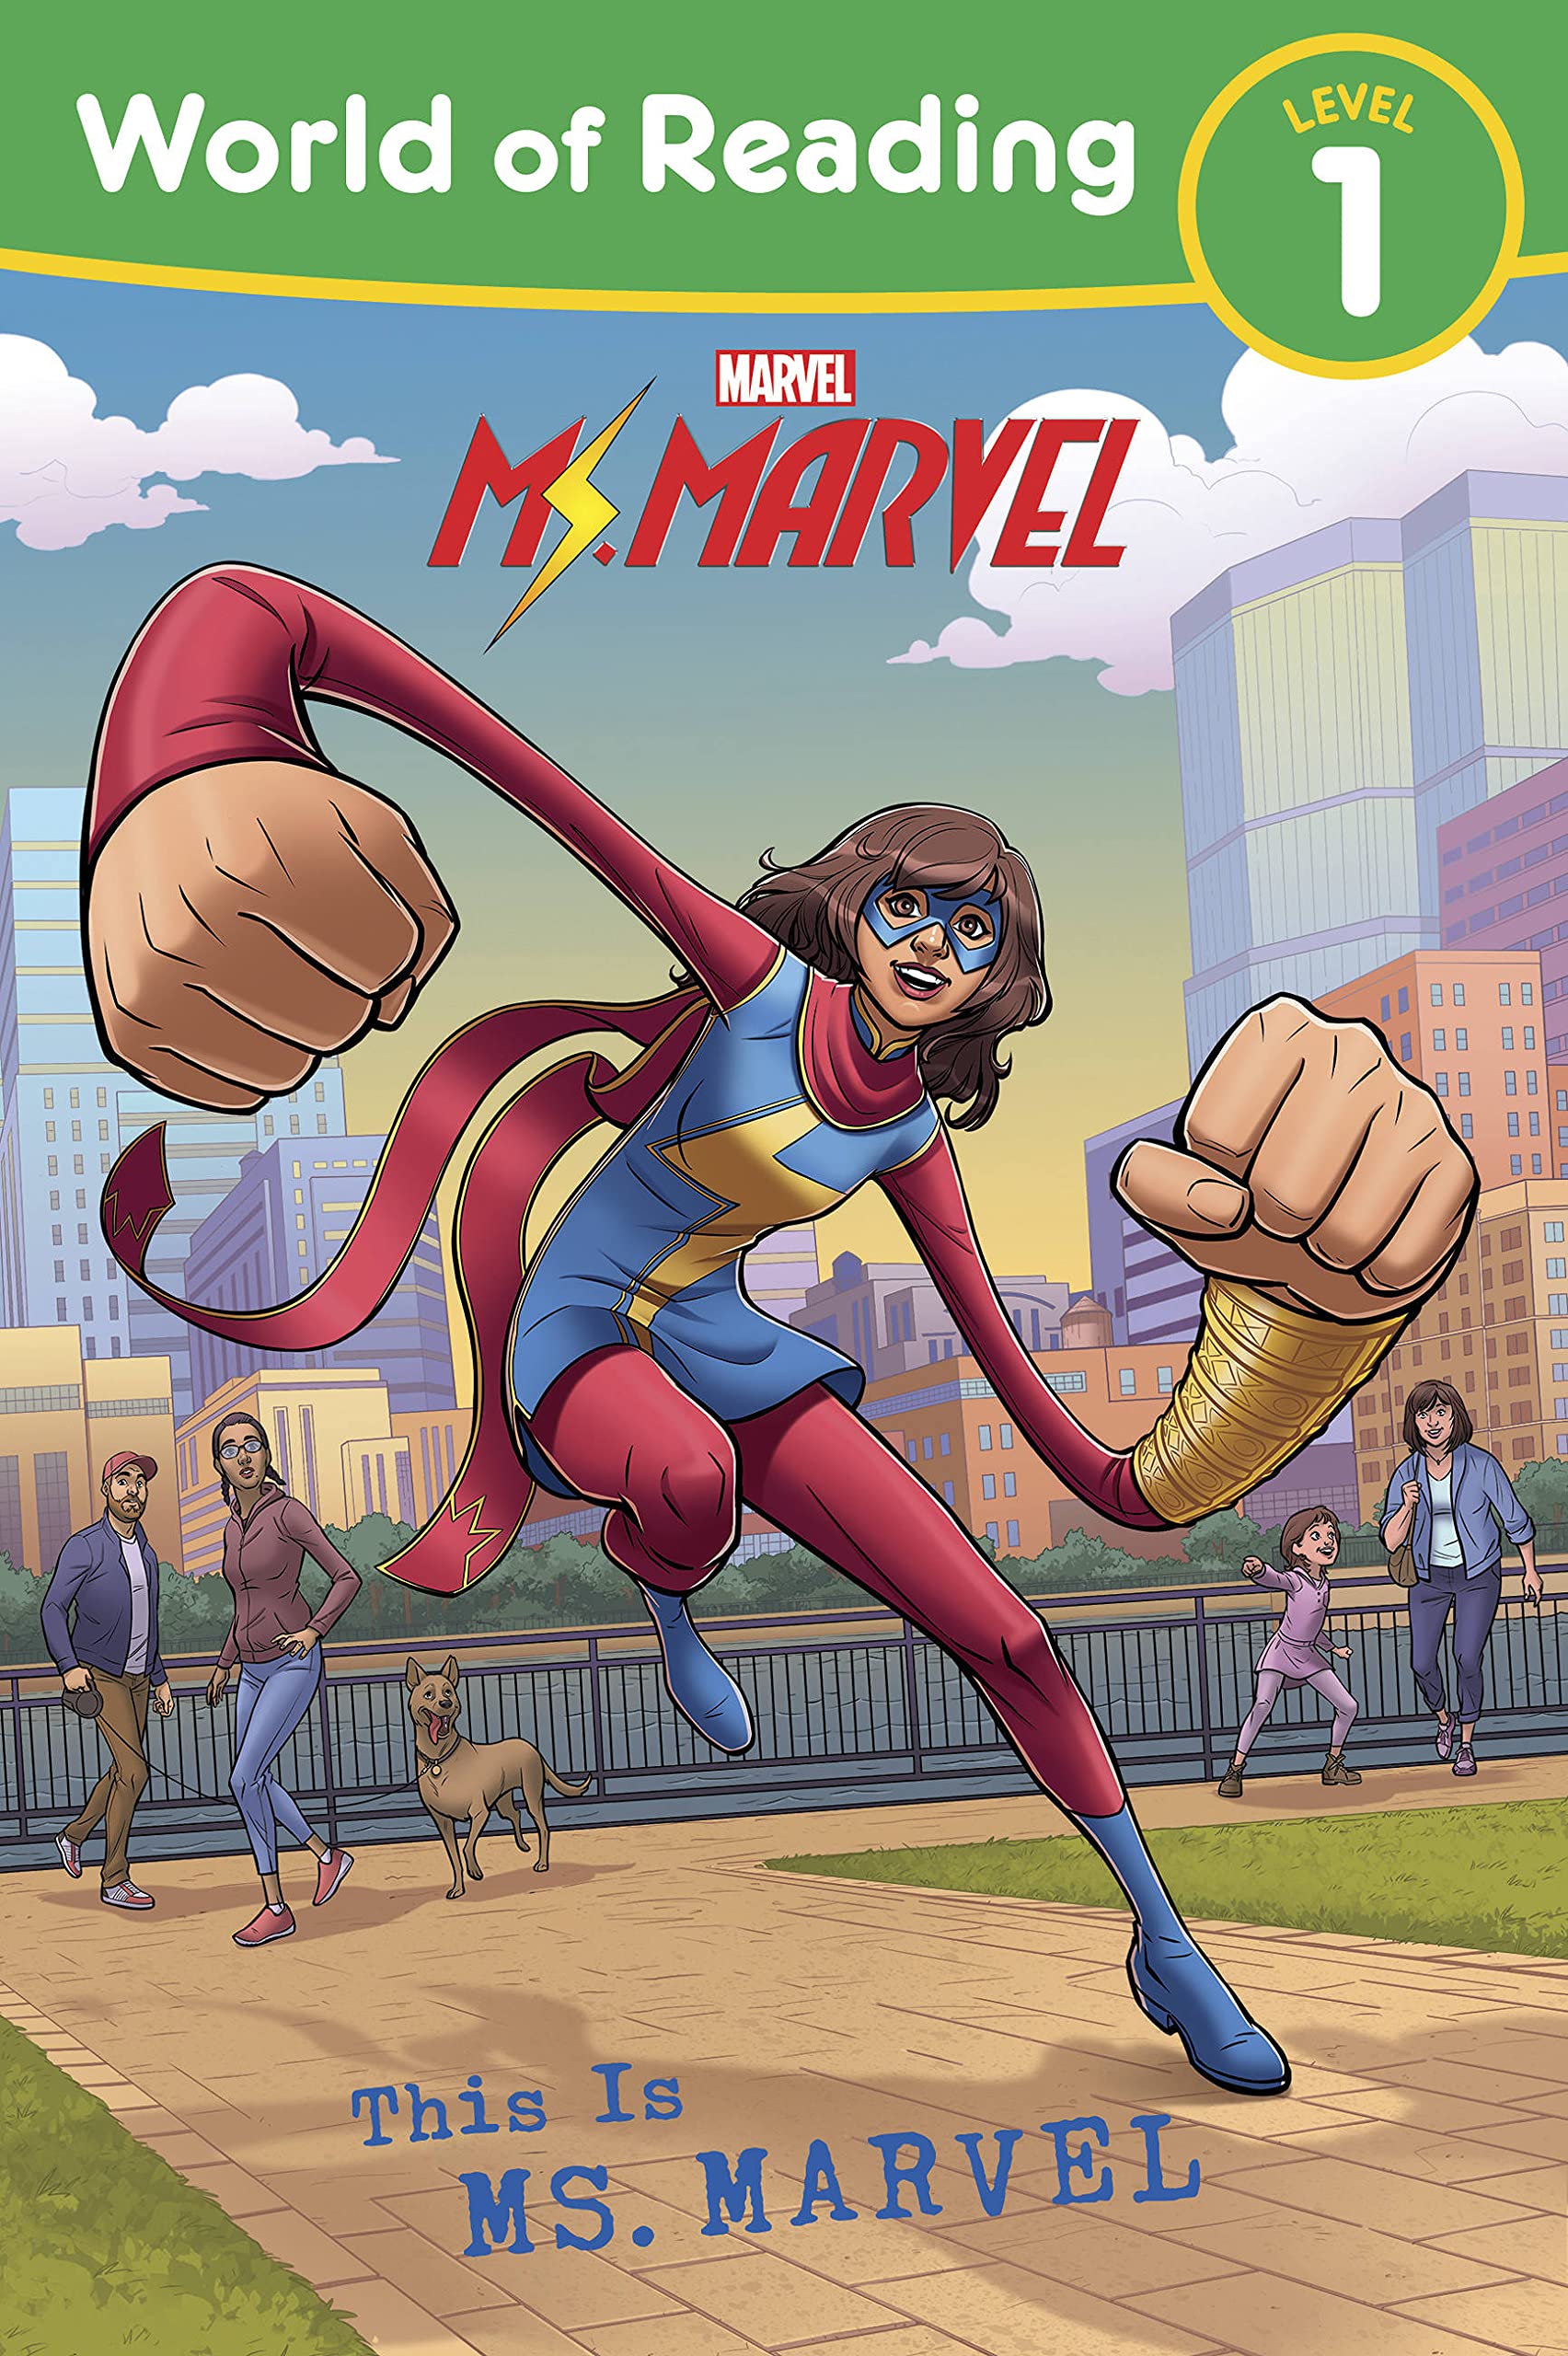 World of Reading This Is Ms Marvel